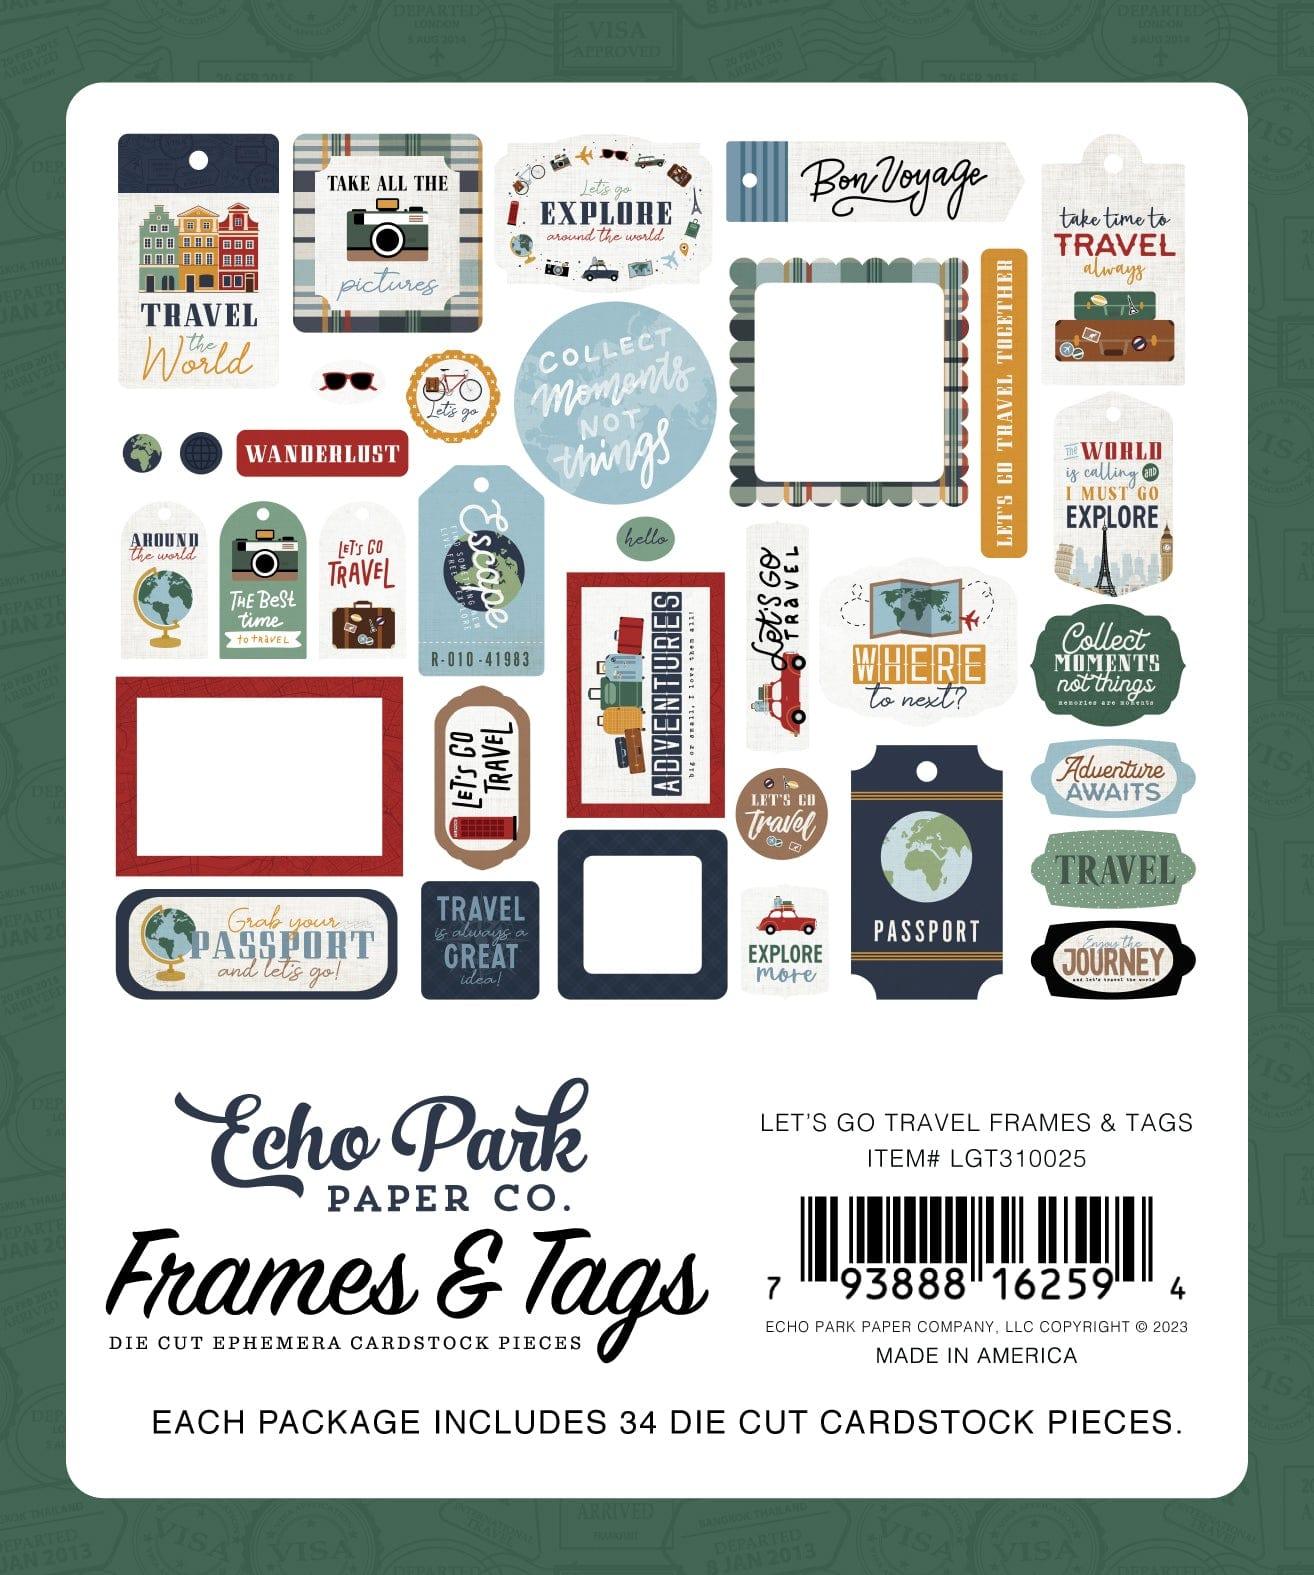 Let's Go Travel Collection 5 x 5 Scrapbook Tags & Frames Die Cuts by Echo Park Paper - Scrapbook Supply Companies